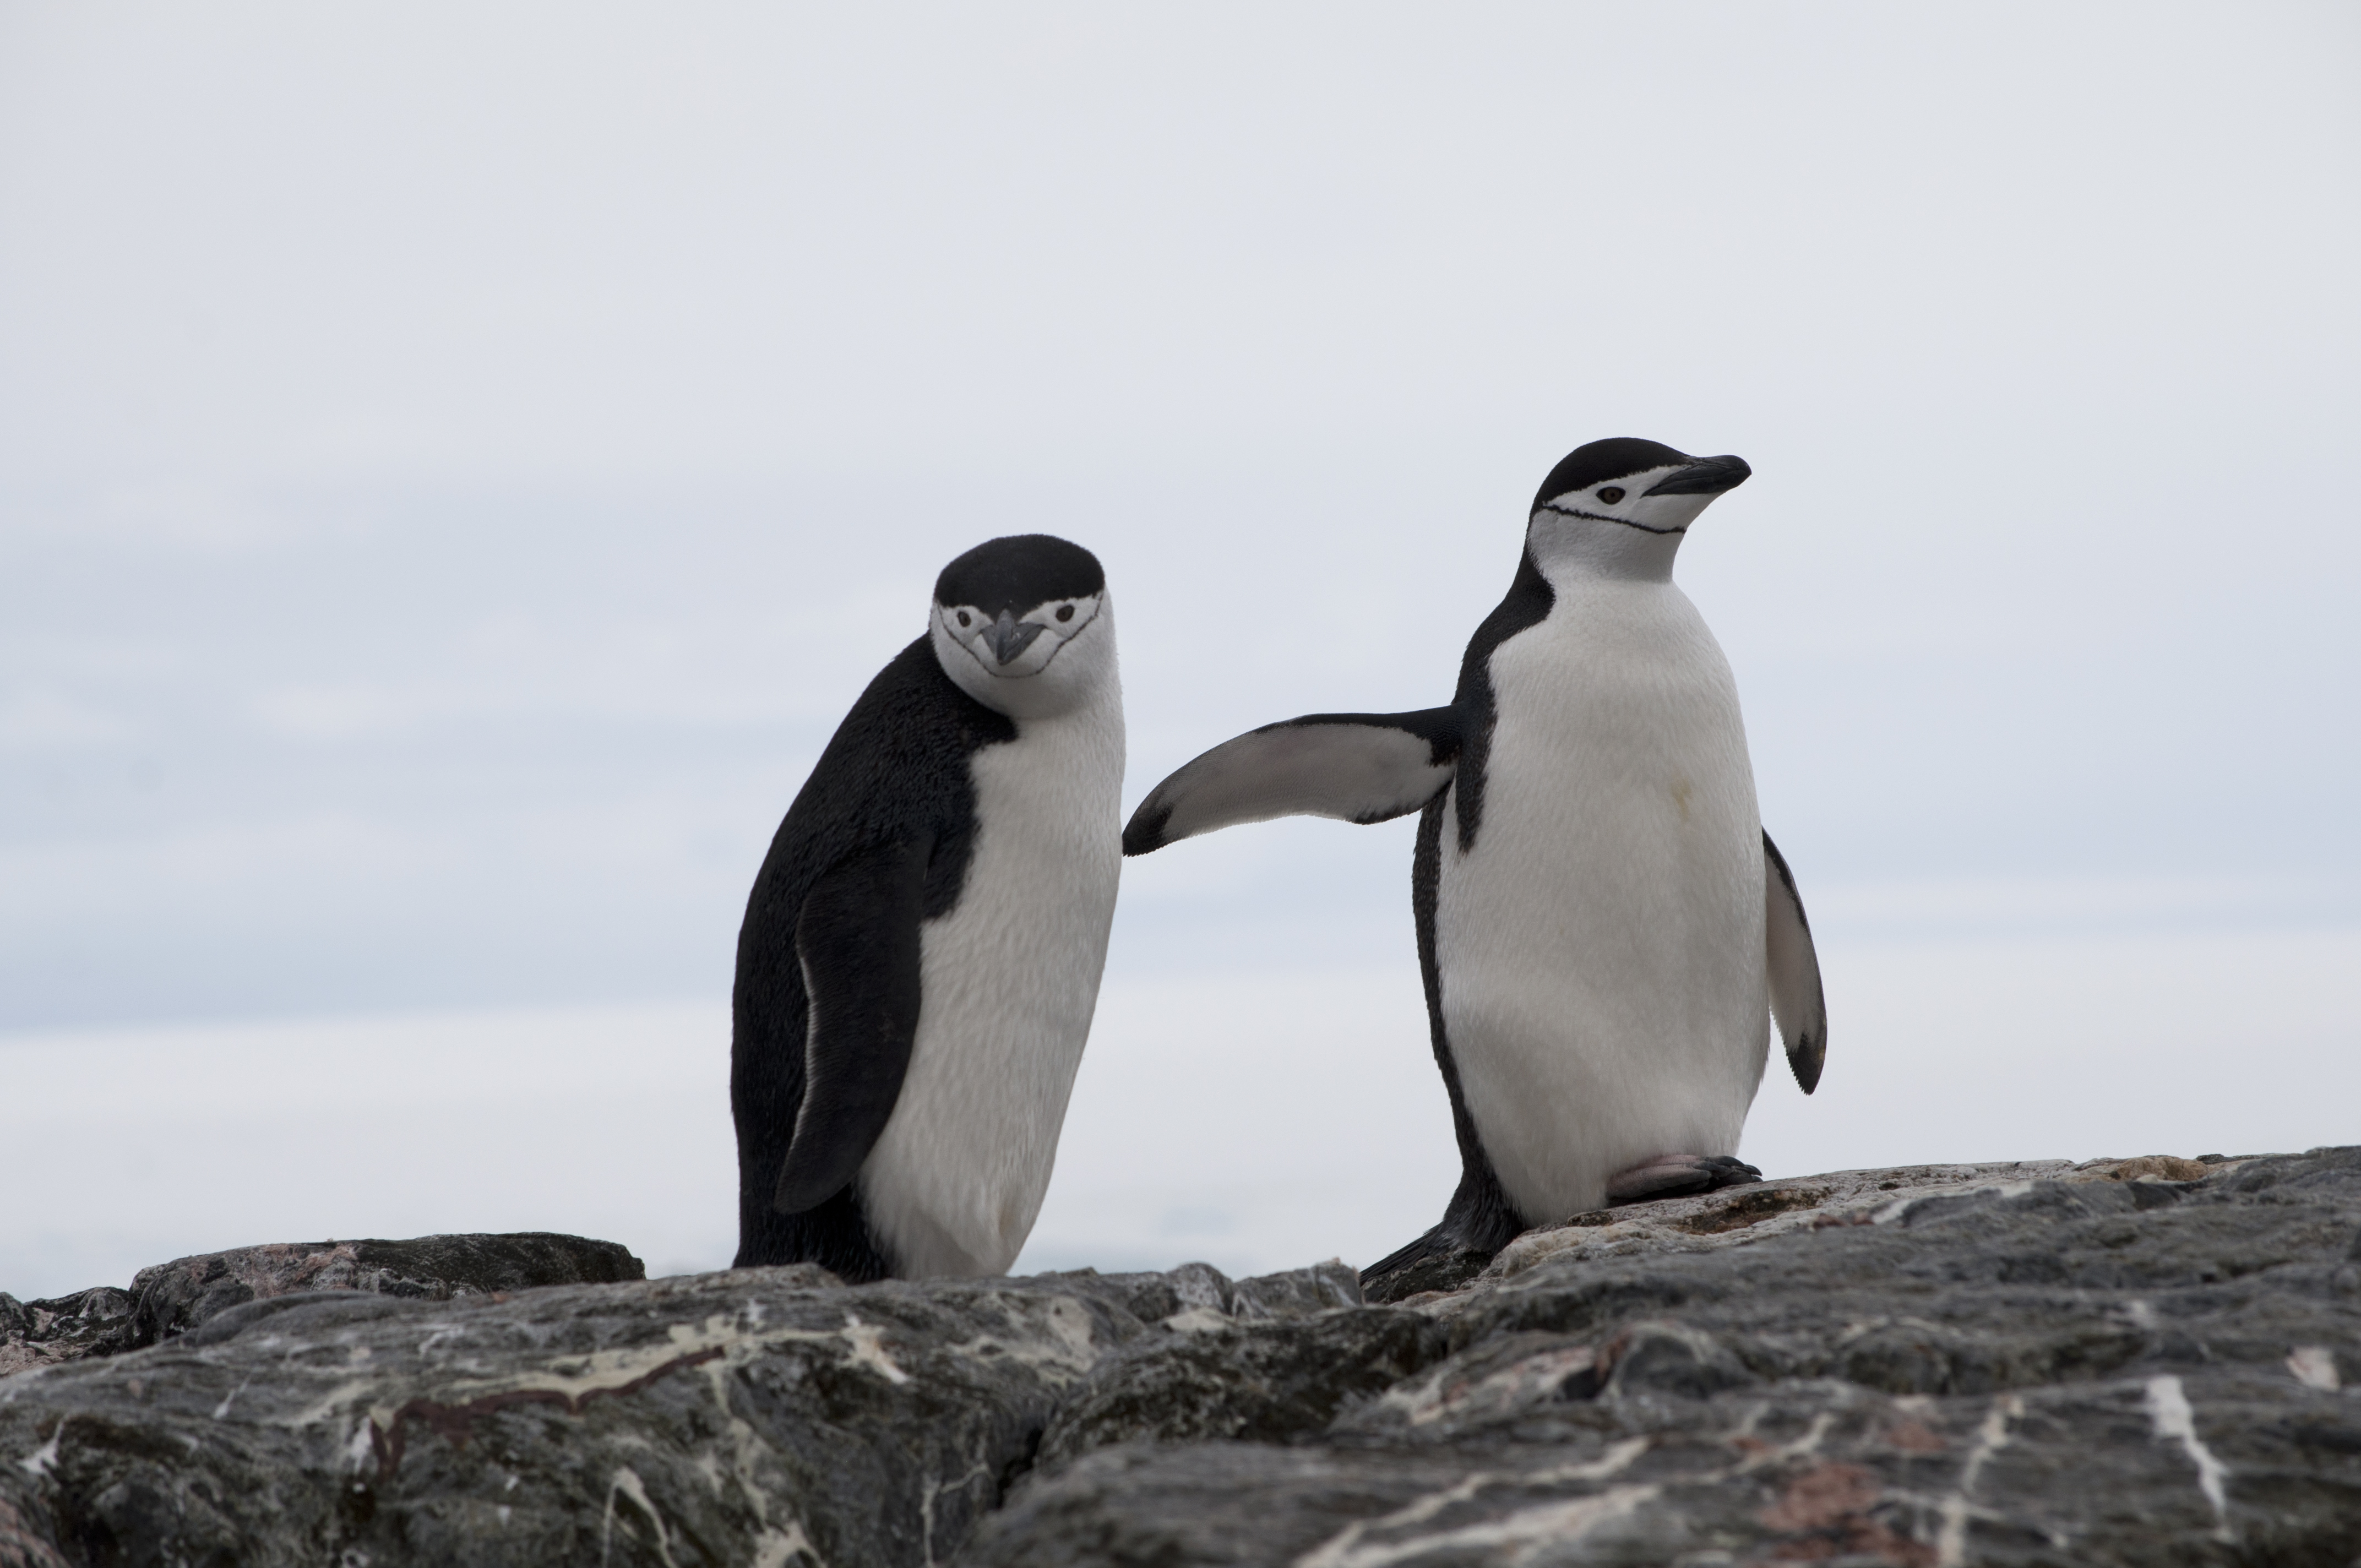 Chinstrap penguins on a rock in Antarctica.